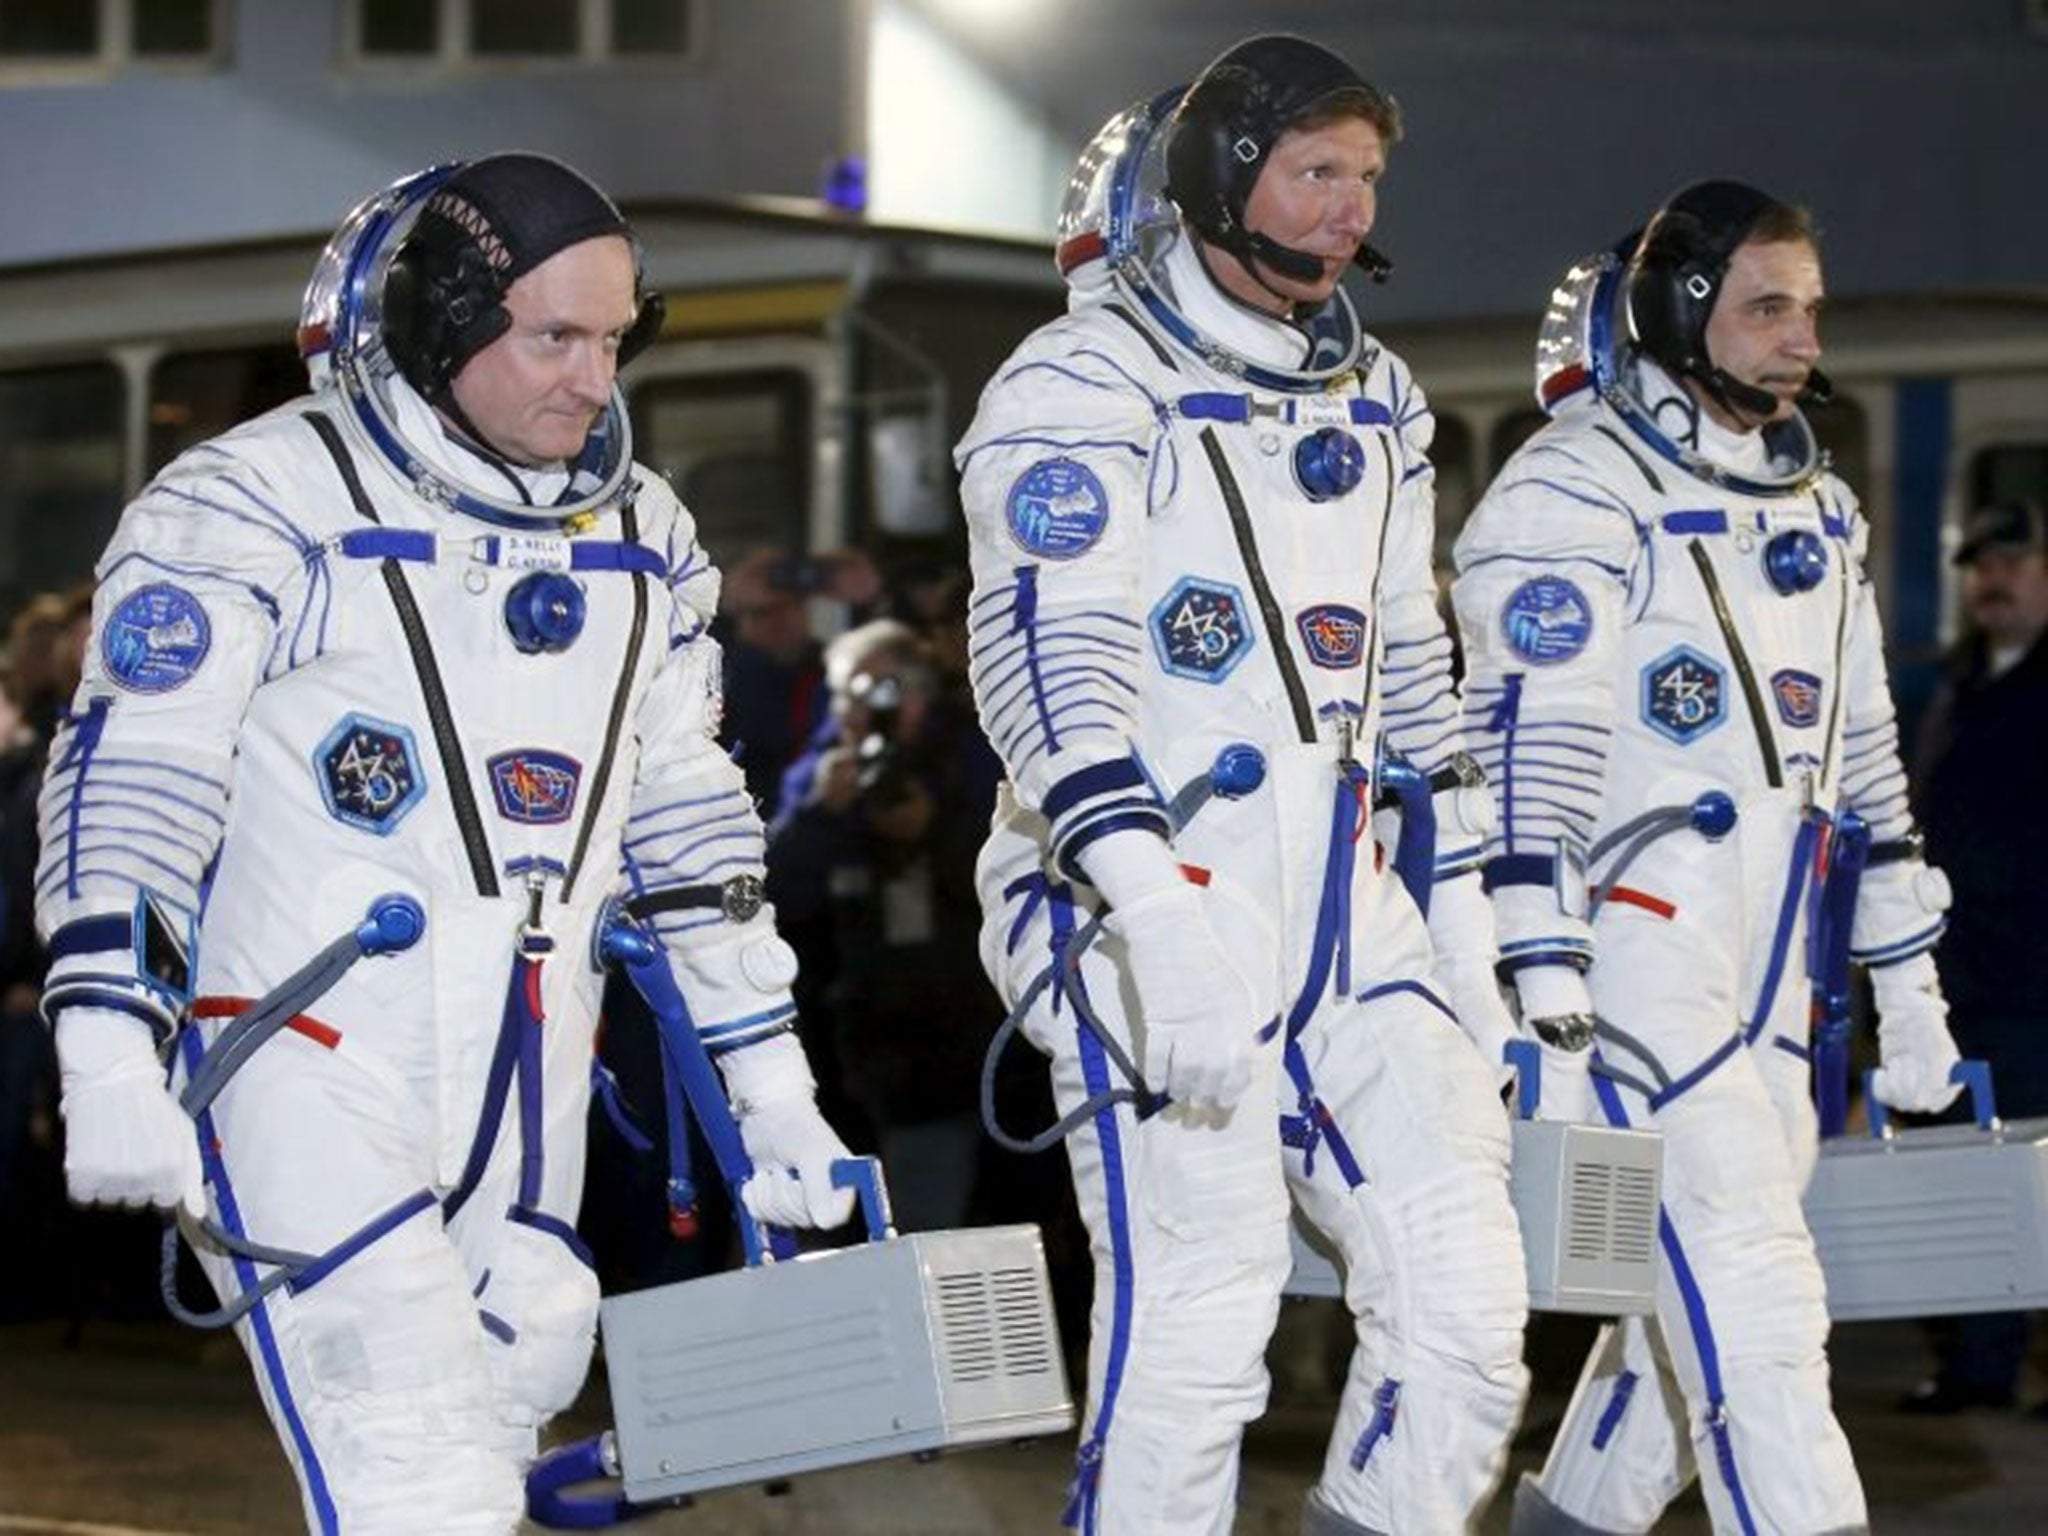 International Space Station (ISS) crew of (L-R) Scott Kelly of the U.S. and Mikhail Kornienko and Gennady Padalka of Russia walk after donning space suits at the Baikonur cosmodrome.